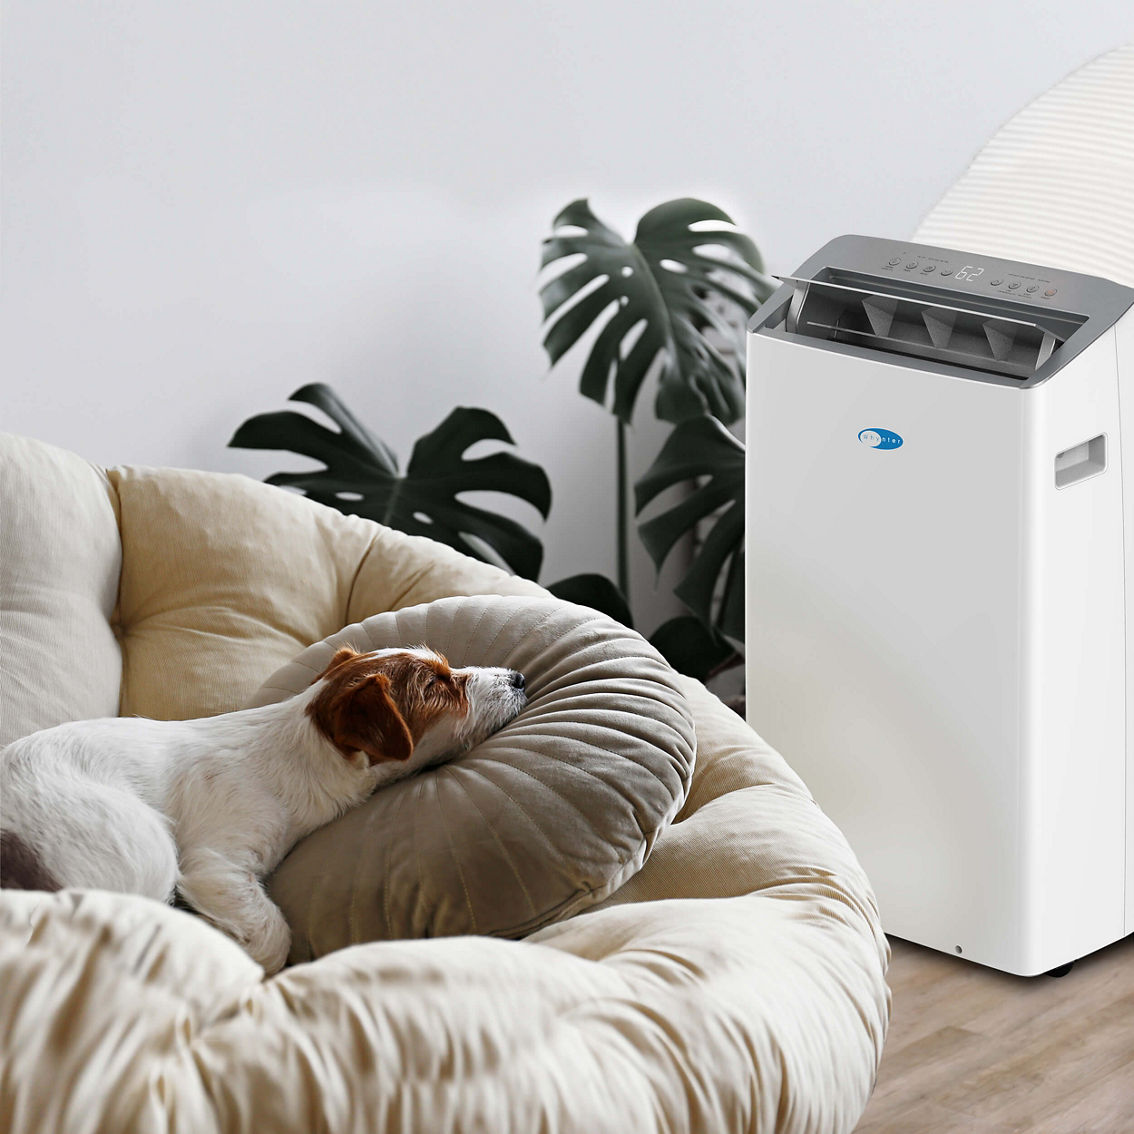 Whynter 14,000 BTU Portable Air Conditioner, Heater, Dehumidifer and Fan with Wi-Fi - Image 7 of 7